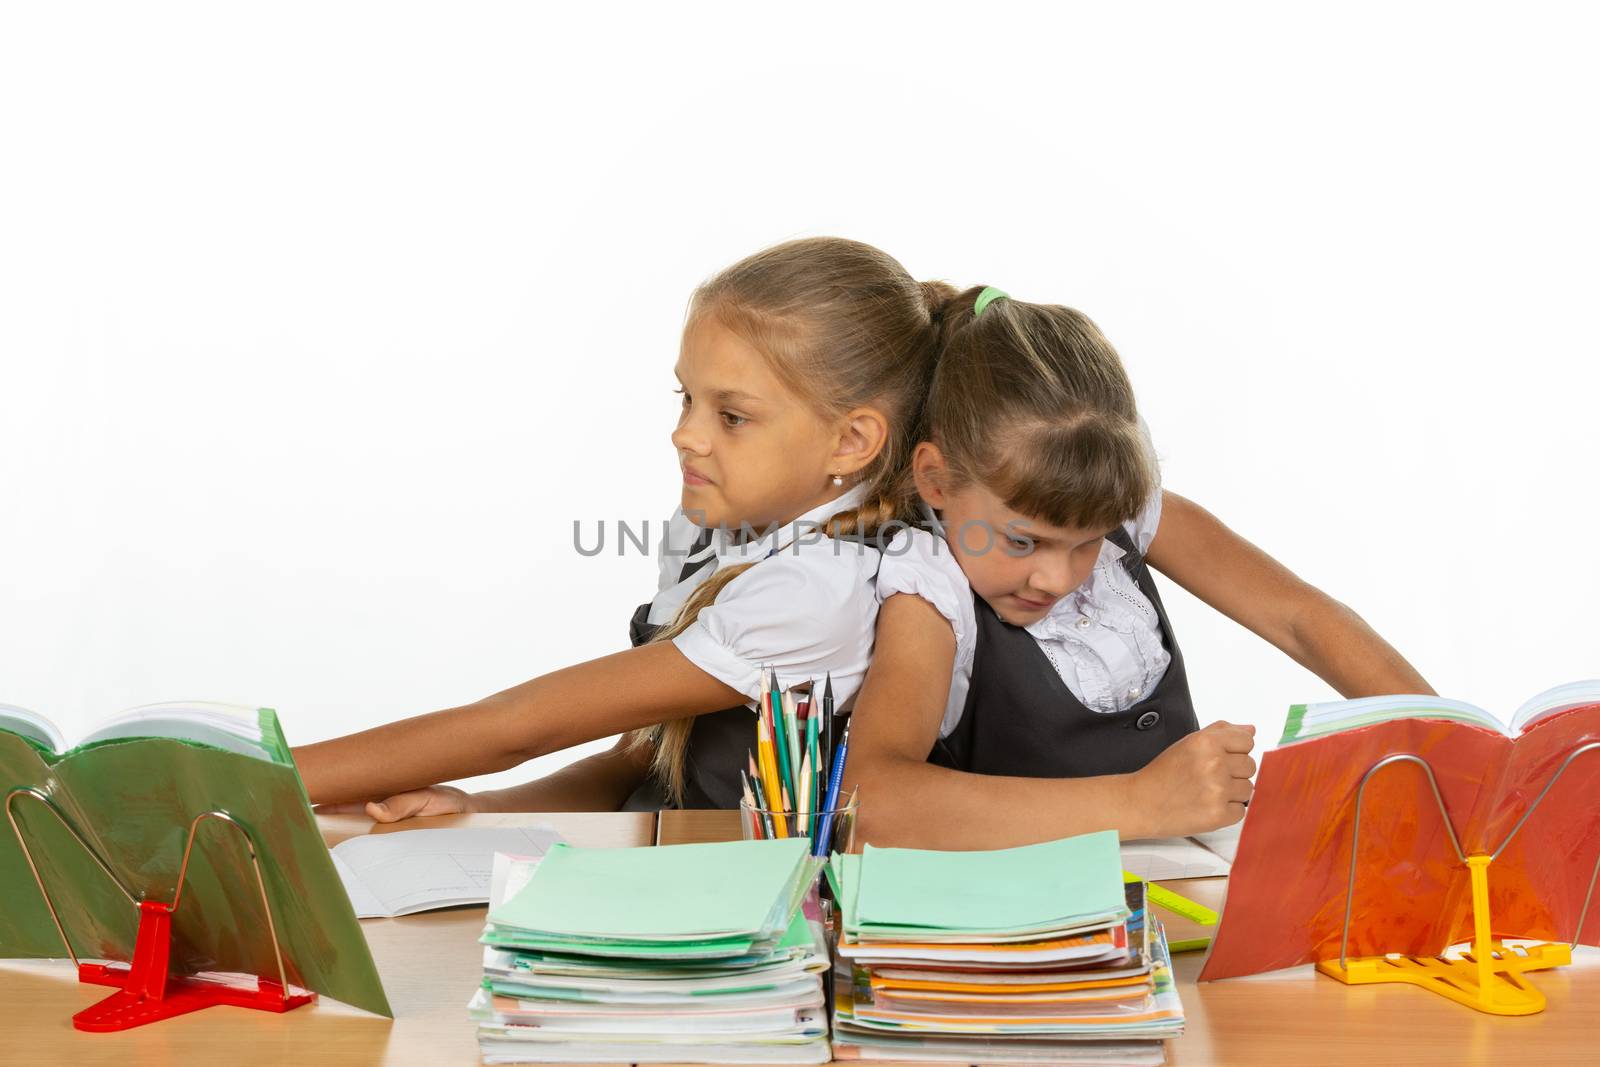 Two girls share a desk and push each other's backs